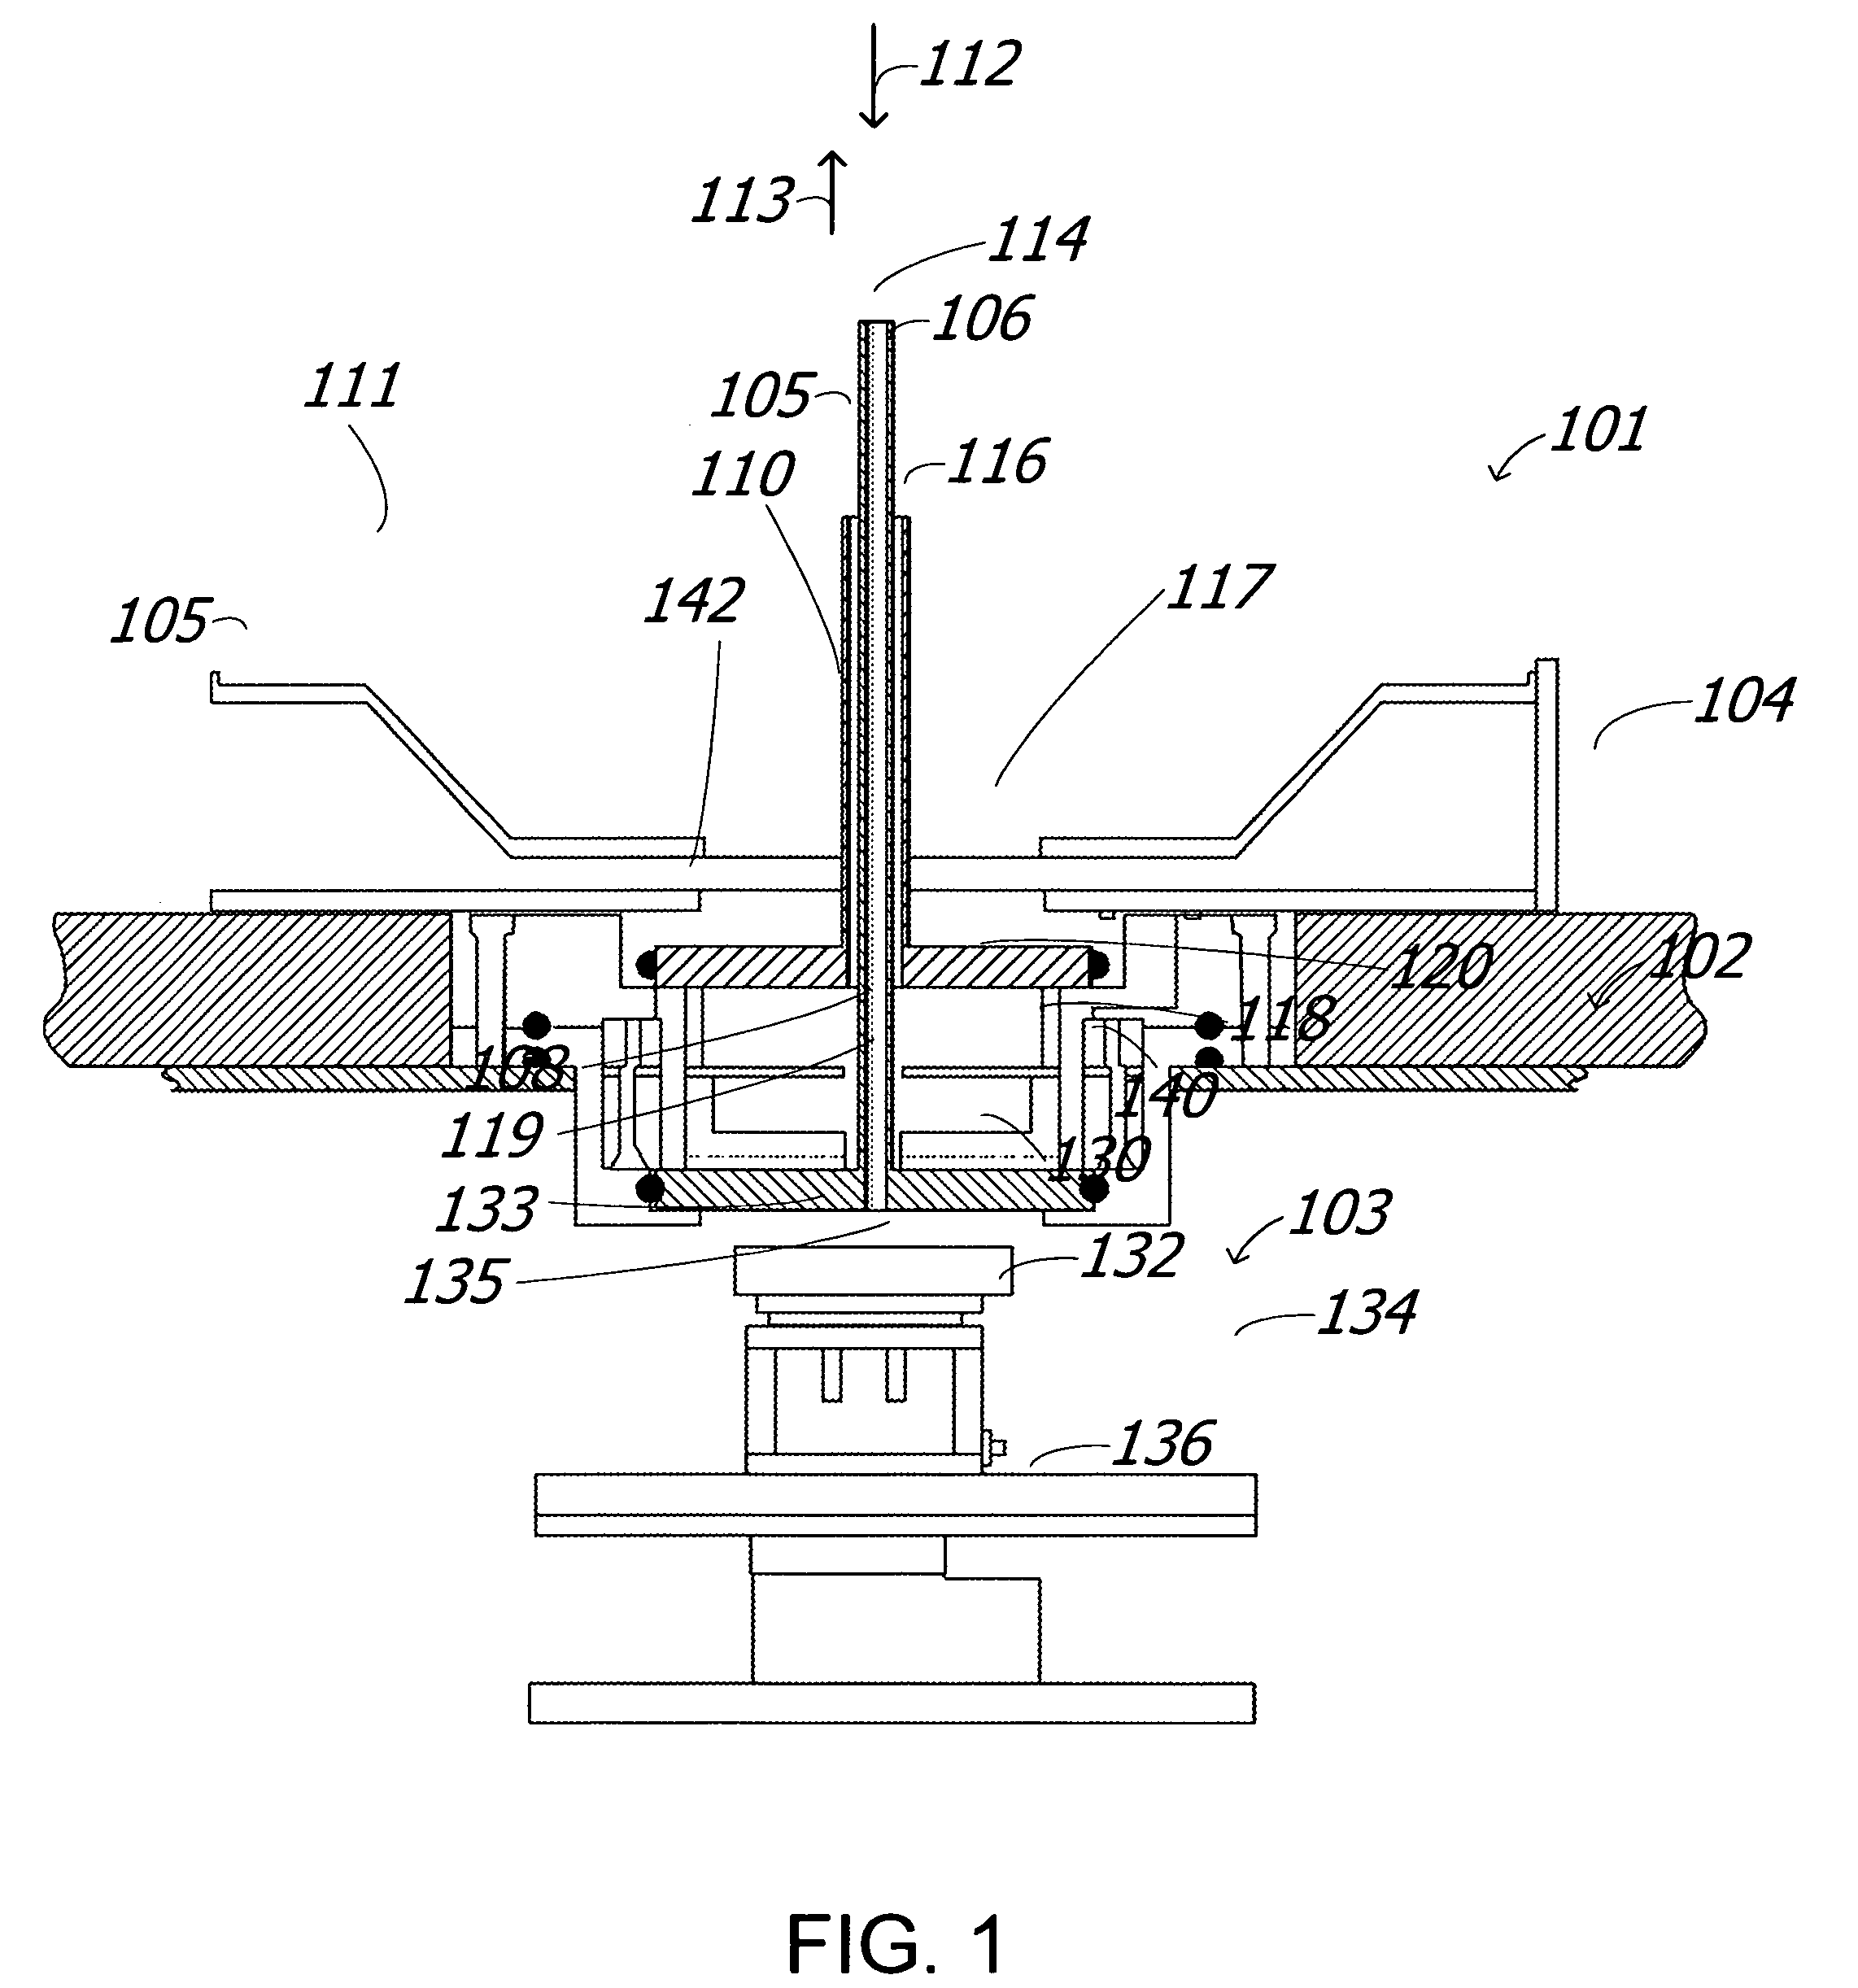 Medium pressure plasma system for removal of surface layers without substrate loss